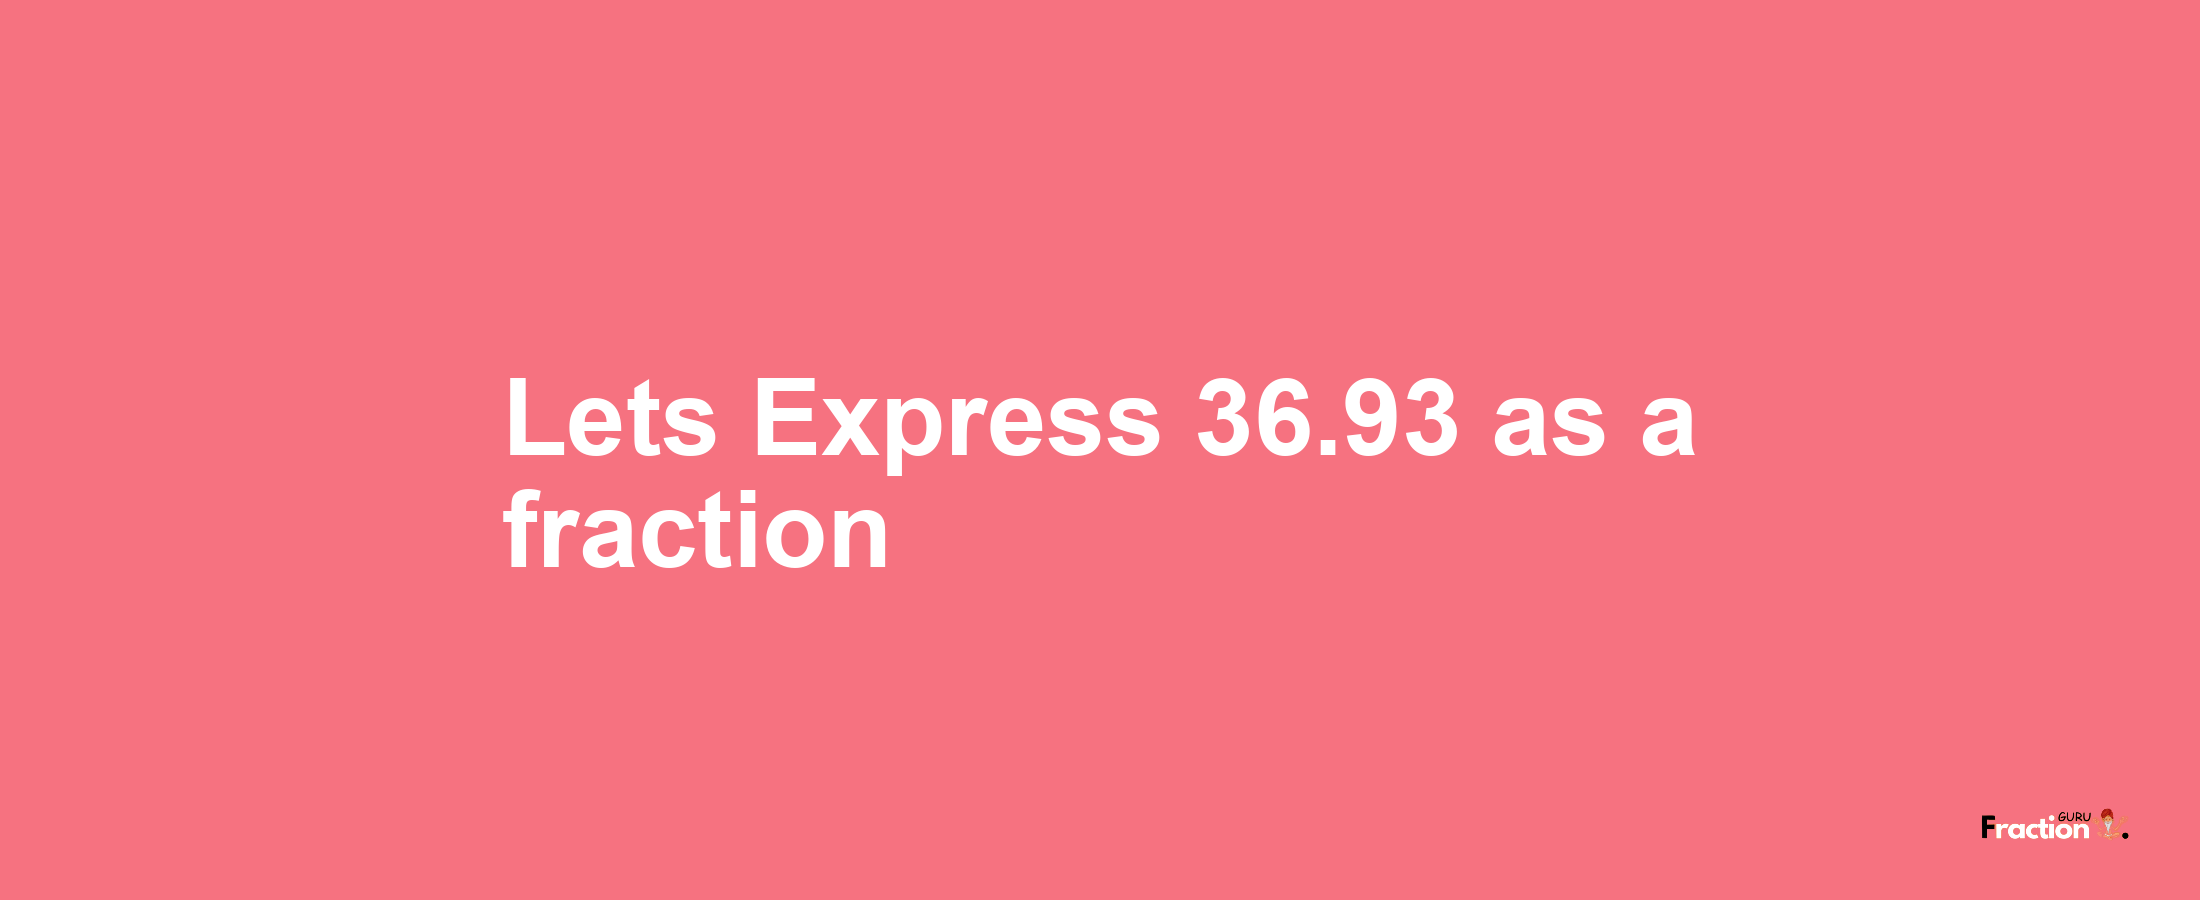 Lets Express 36.93 as afraction